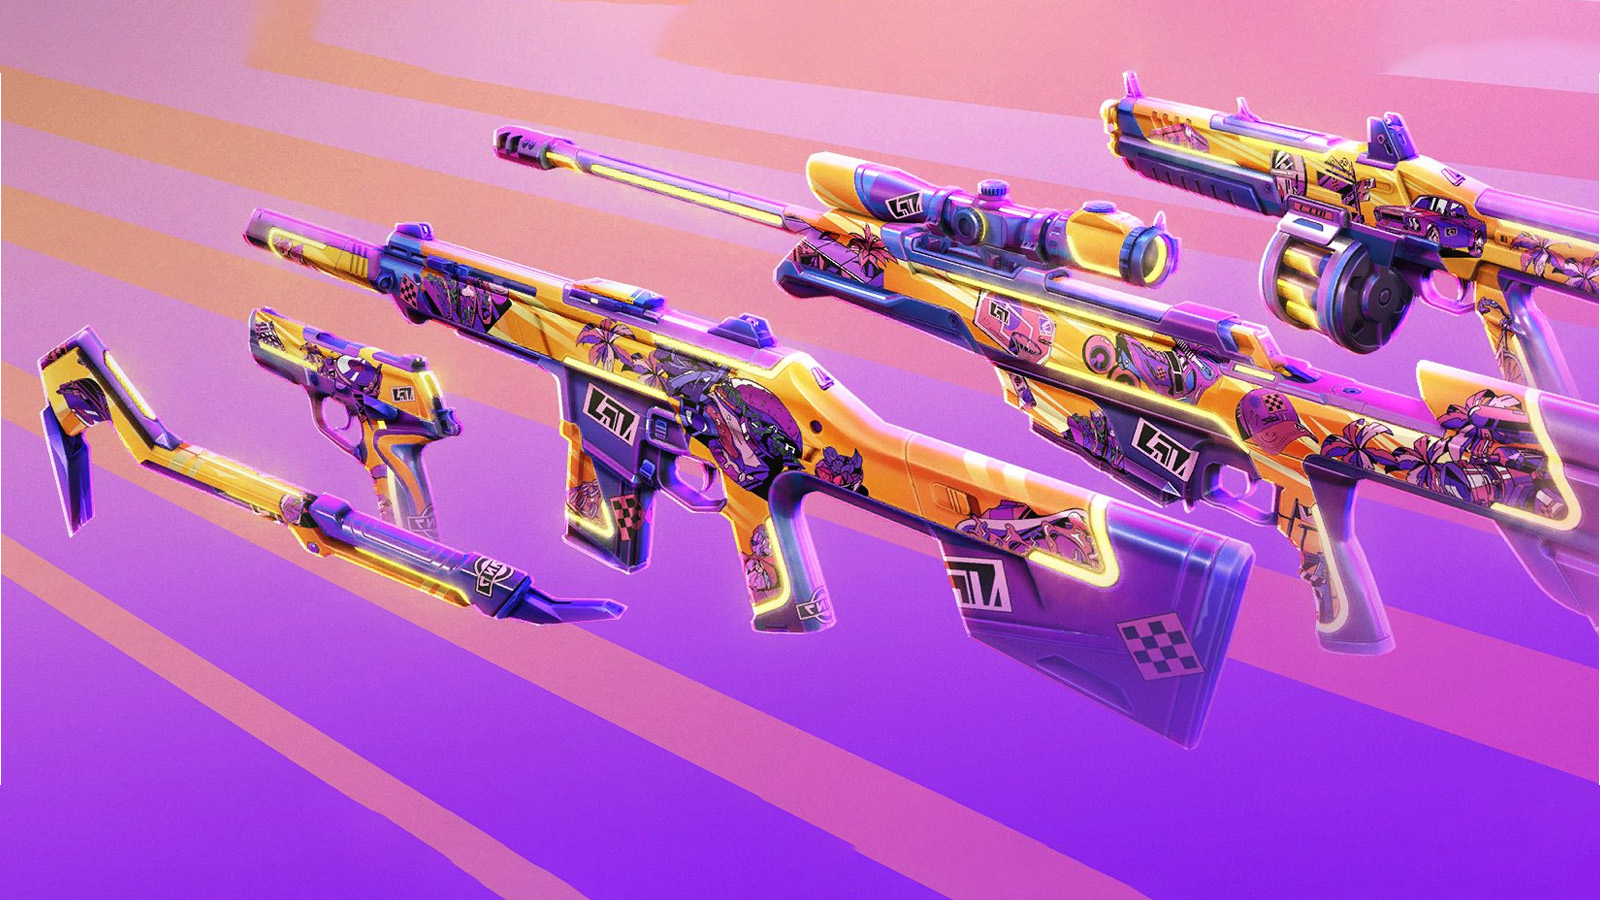 Leaked image of the Valorant Daydreams skin bundle from ValorLeaks on Twitter